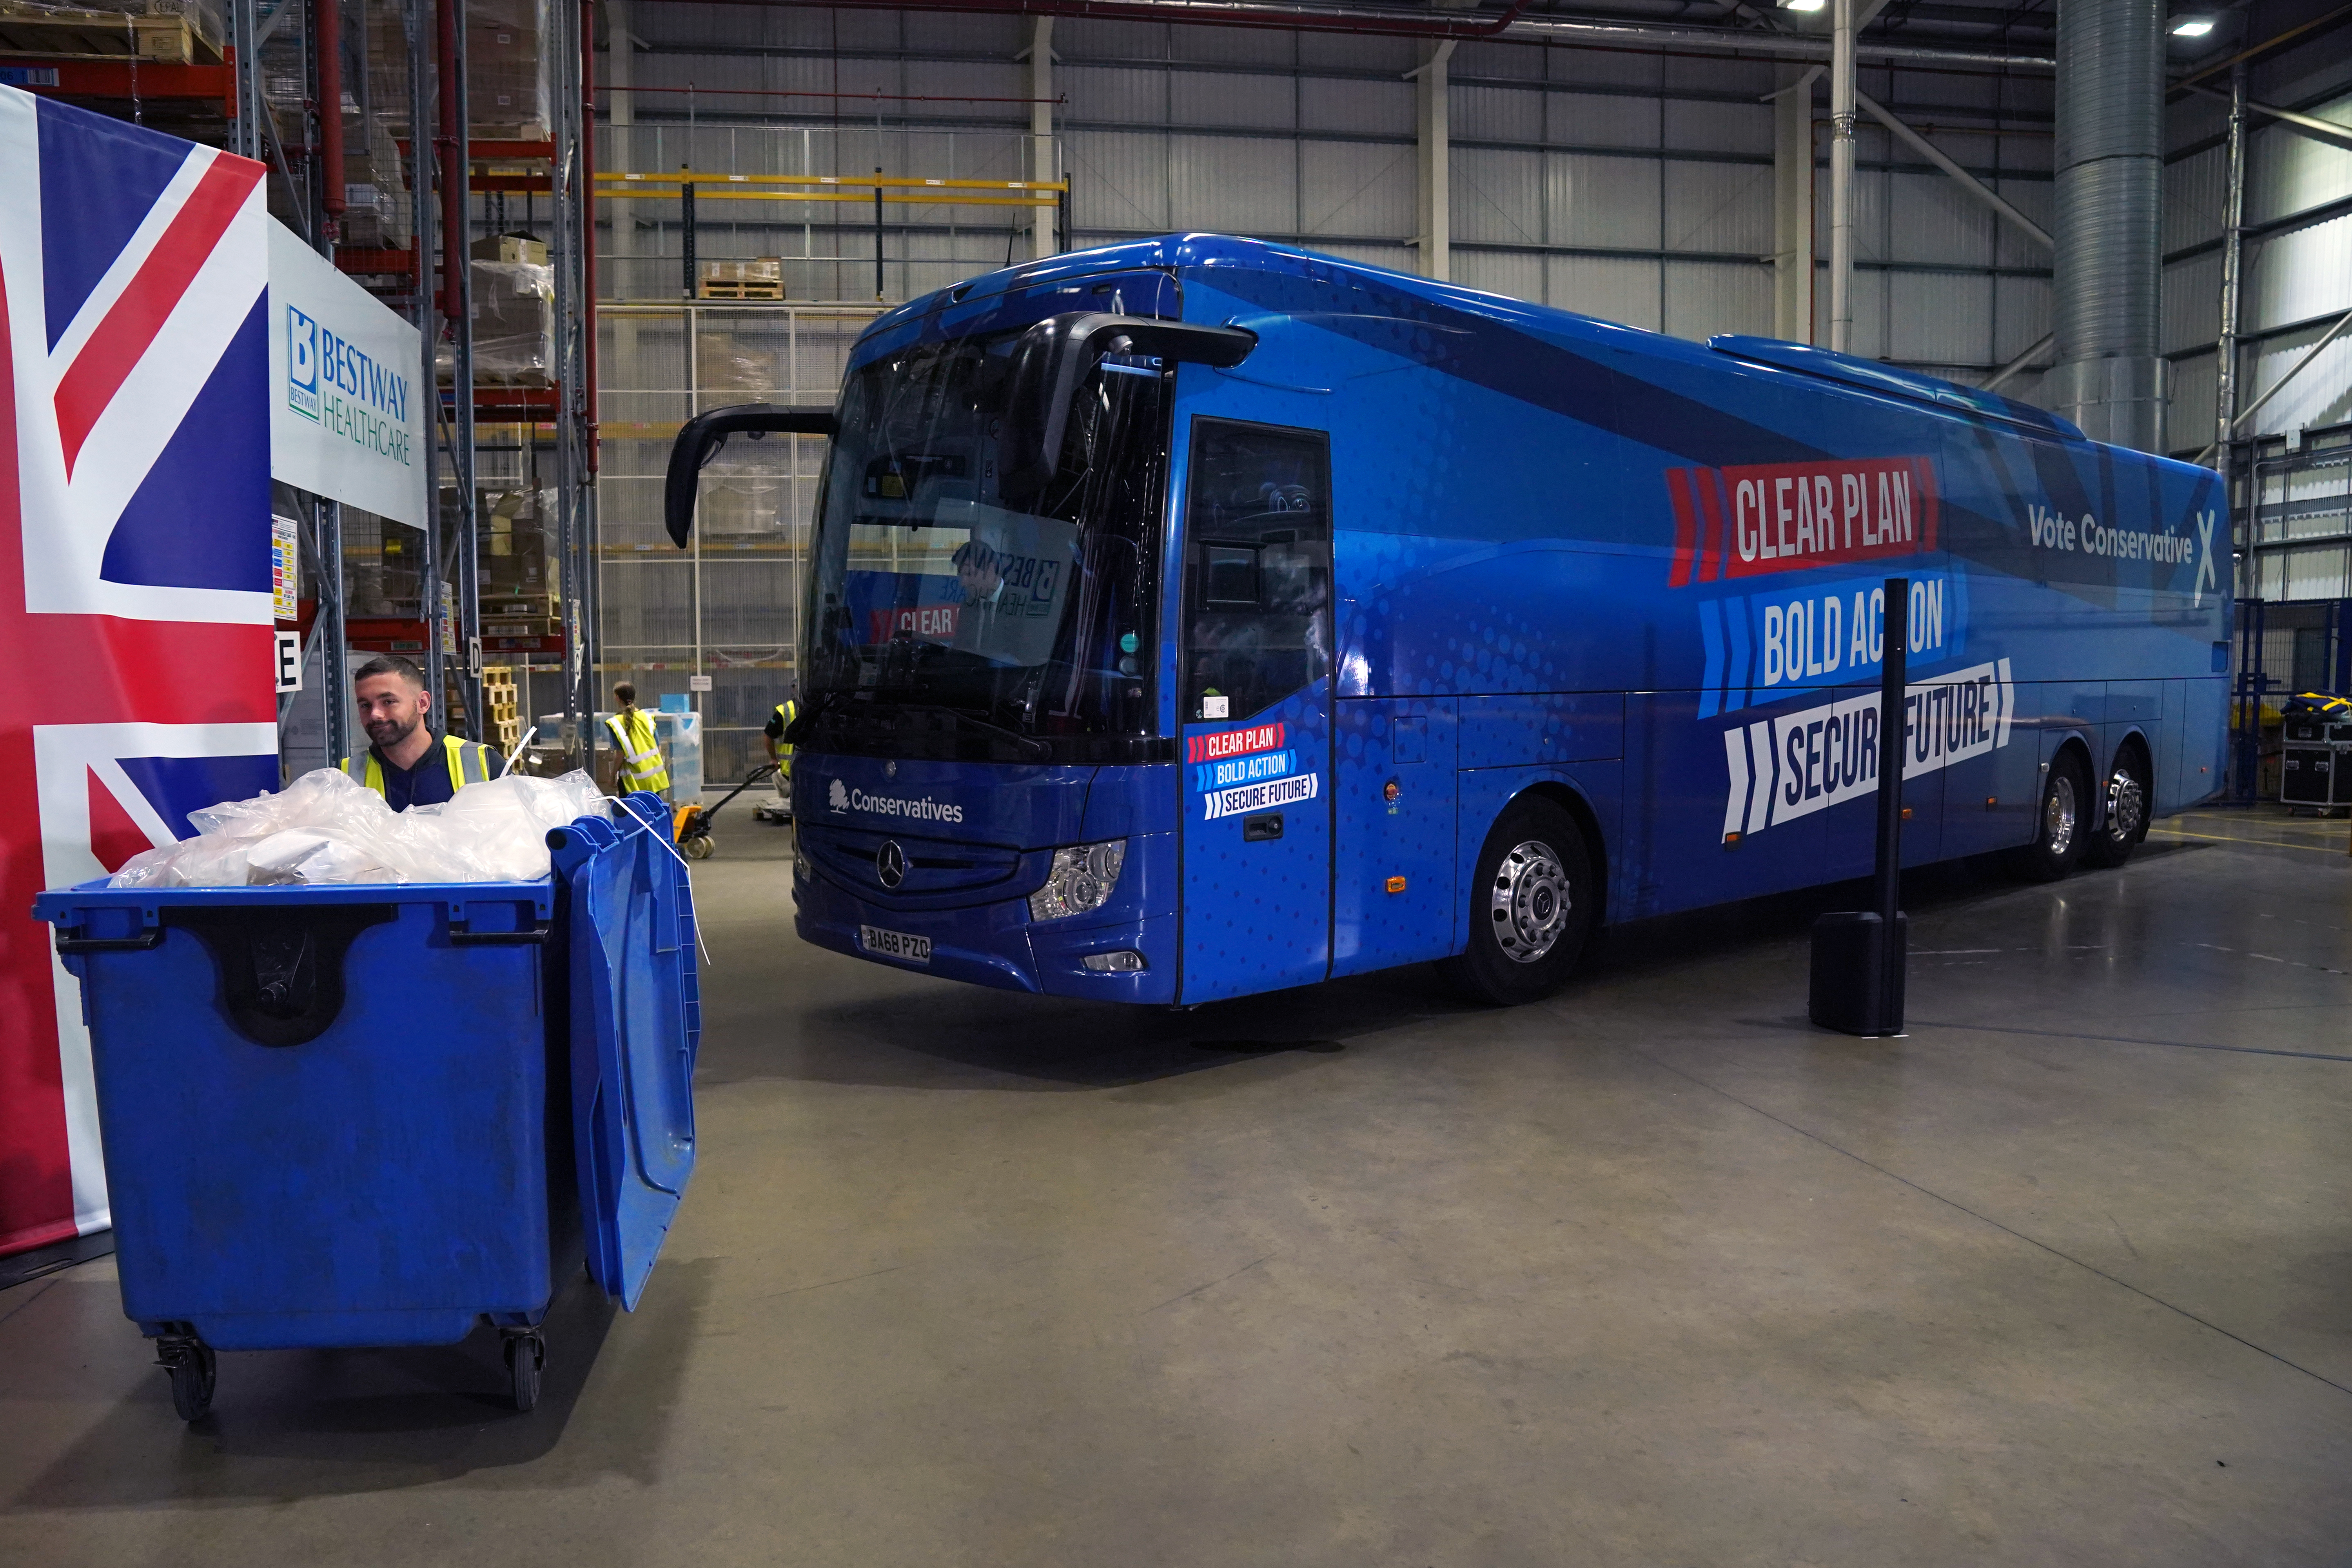 The Tory battle bus parked 